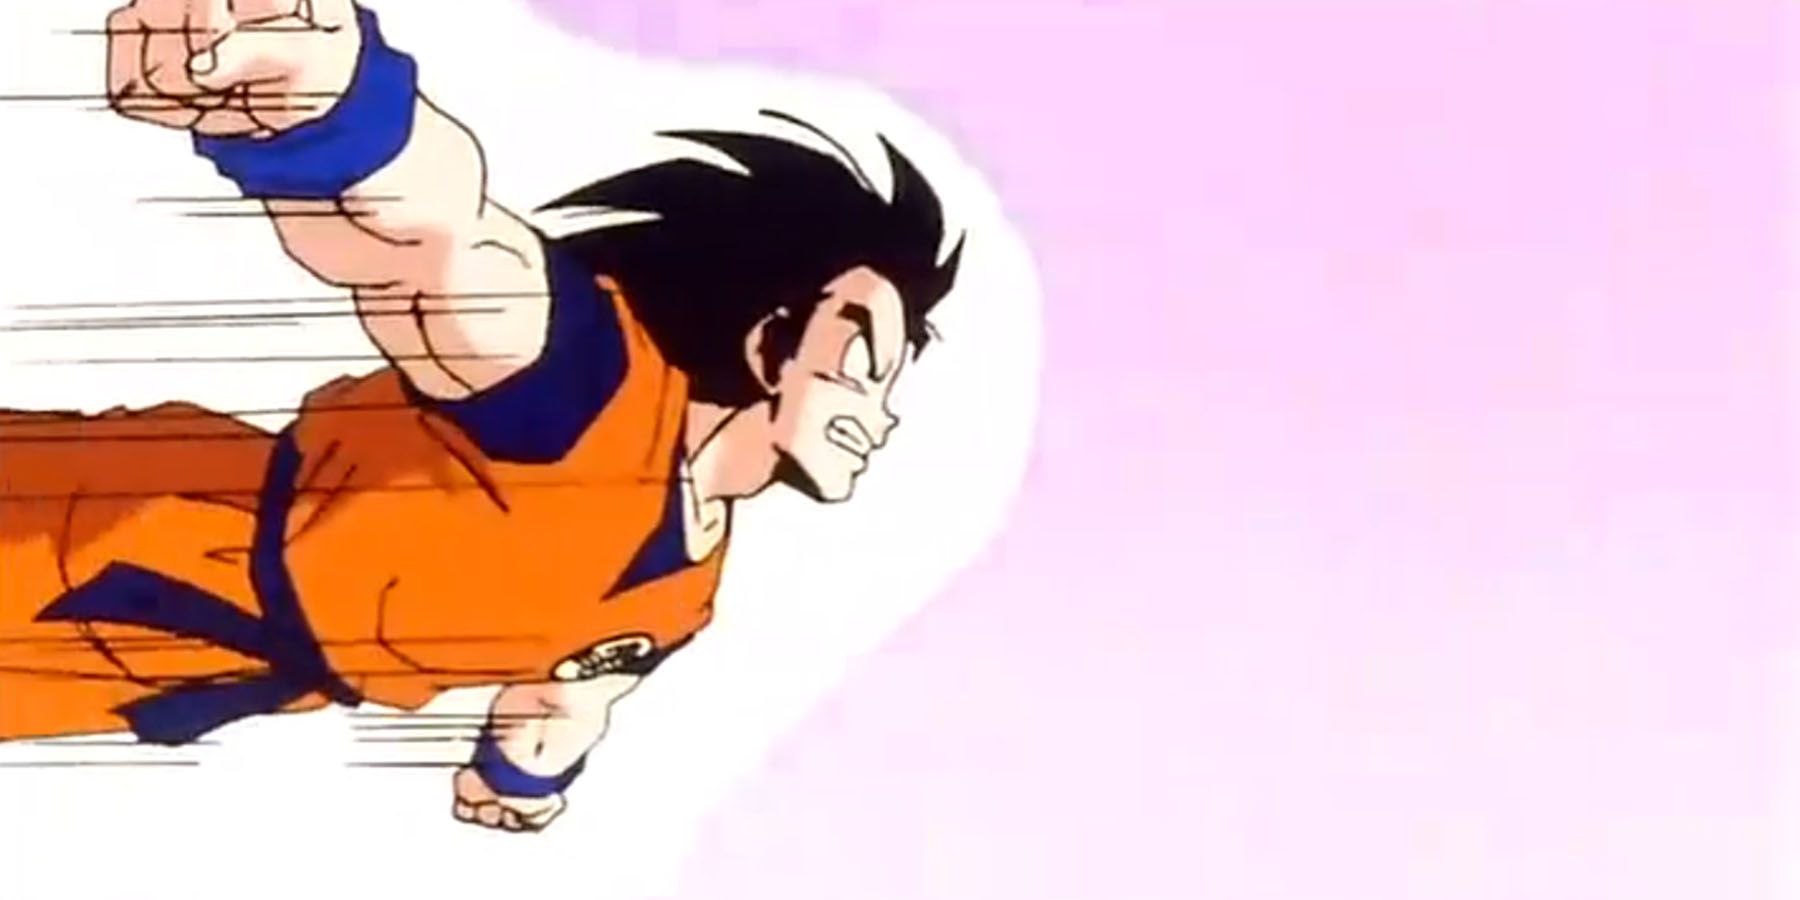 Goku flying at full force.